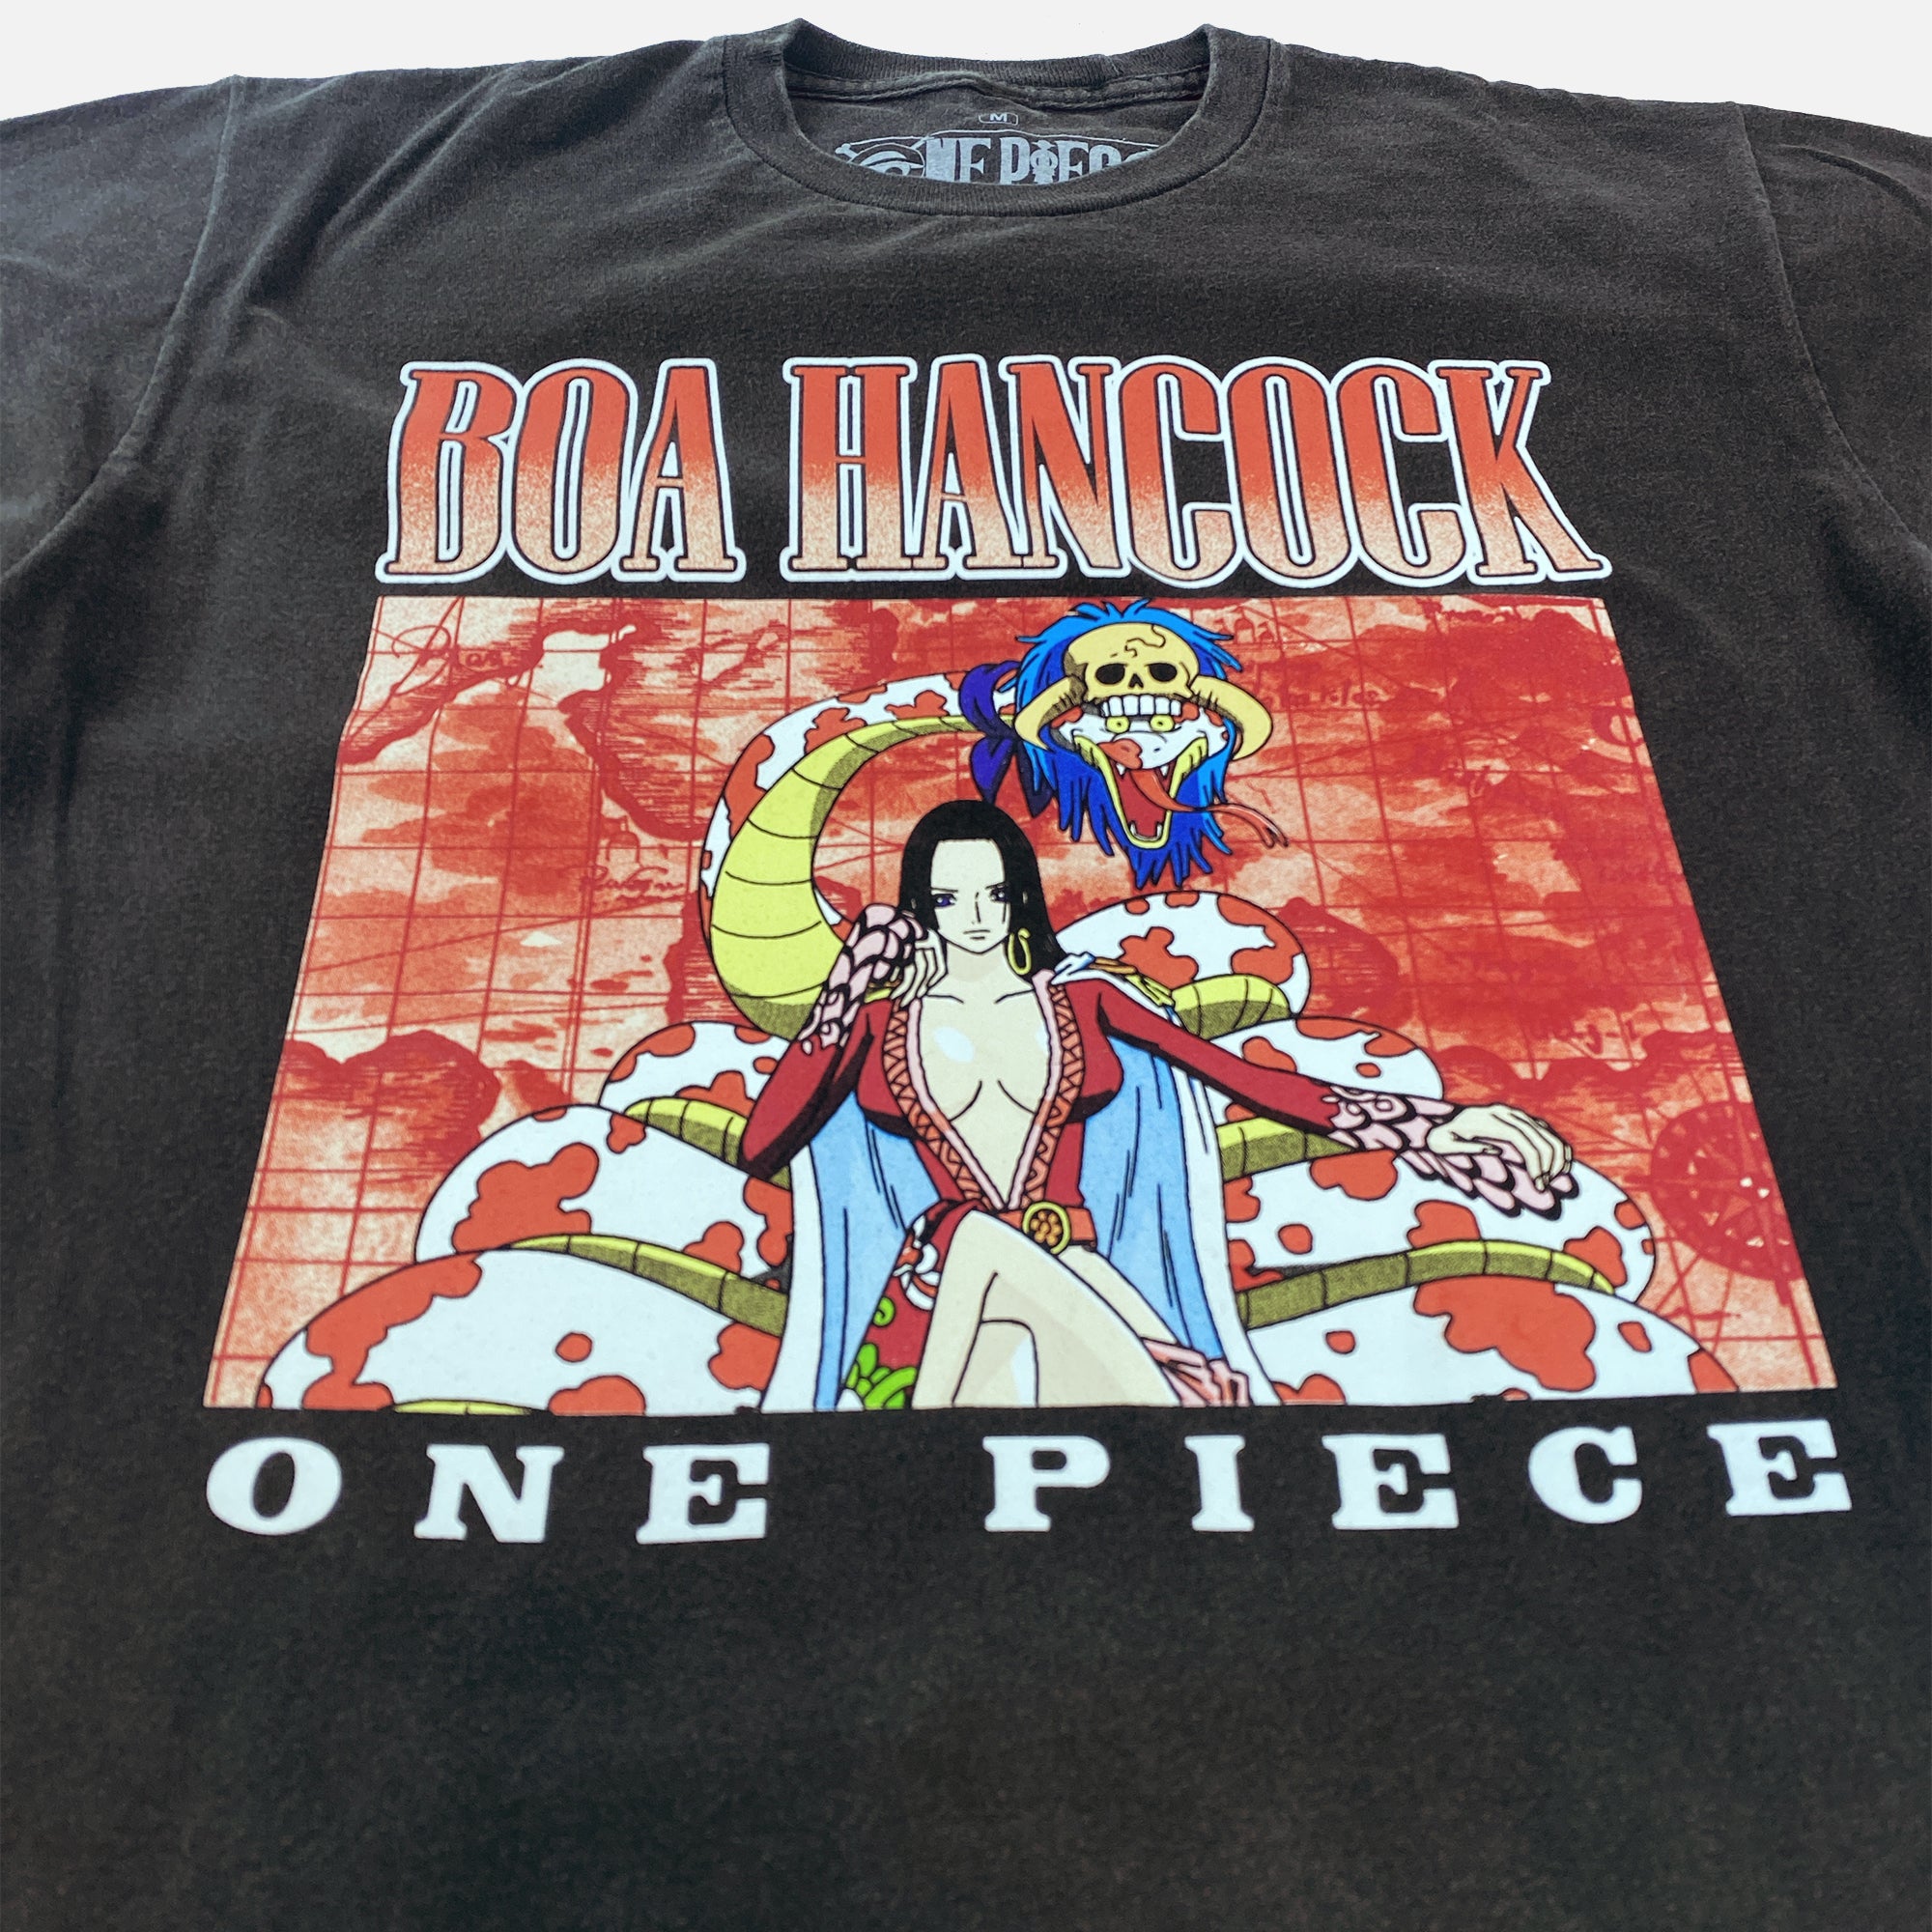 One Piece - Boa Hancock 90's T-Shirt - Crunchyroll Exclusive! image count 1